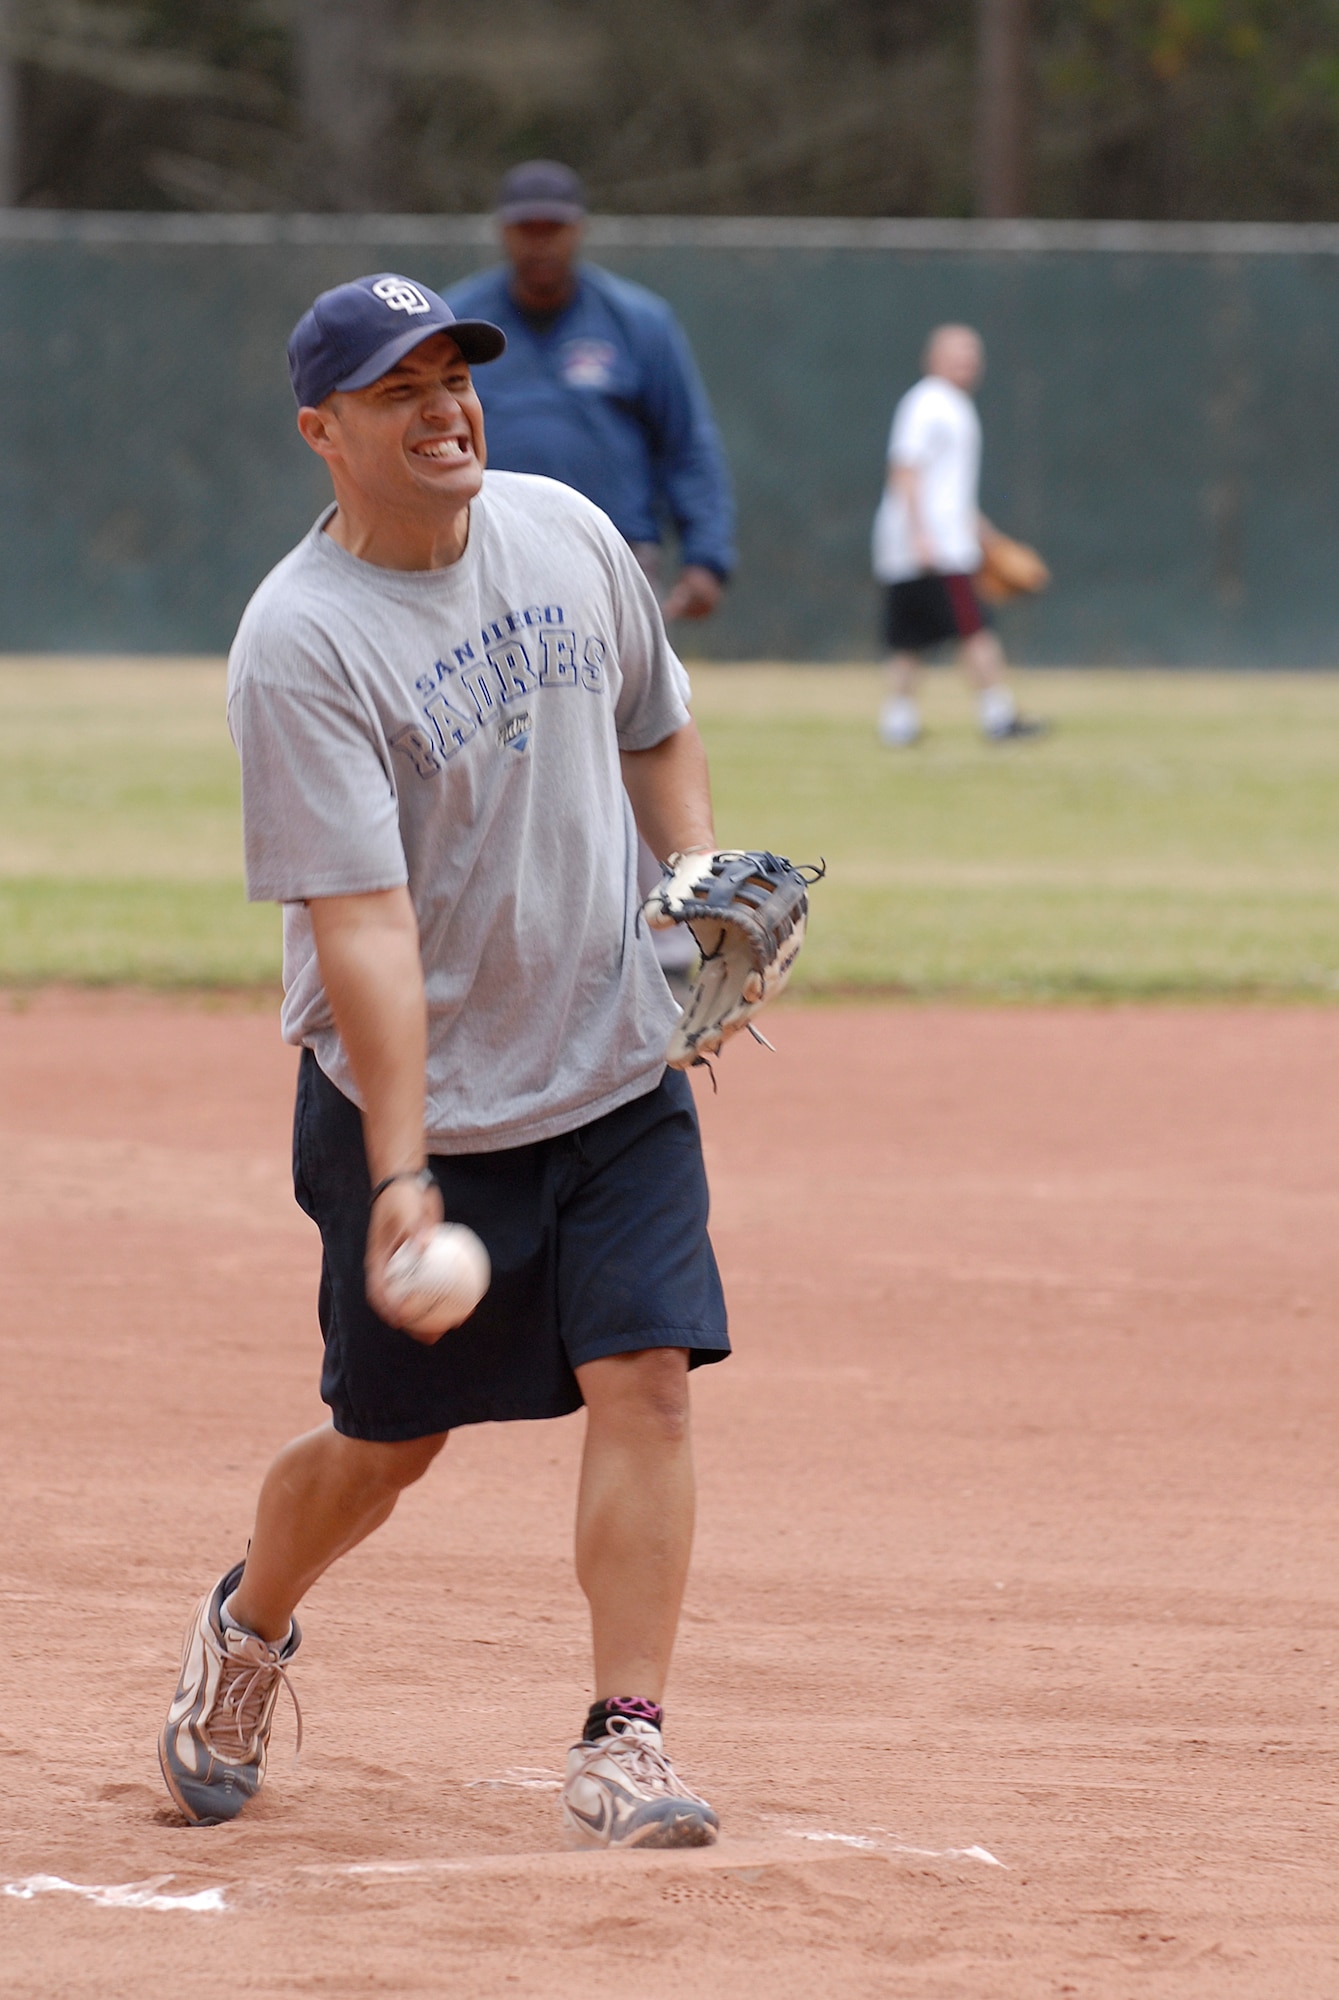 VANDENBERG AIR FORCE BASE, Calif. -- Brian Case, a 30th Security Forces Squadron team member, tosses a softball during an intramural softball game at the baseball field here Tuesday, June 28, 2011.  The 30th SFS team played against the 381st Training Group.  (U.S. Air Force photo/Staff Sgt. Andrew Satran) 

 